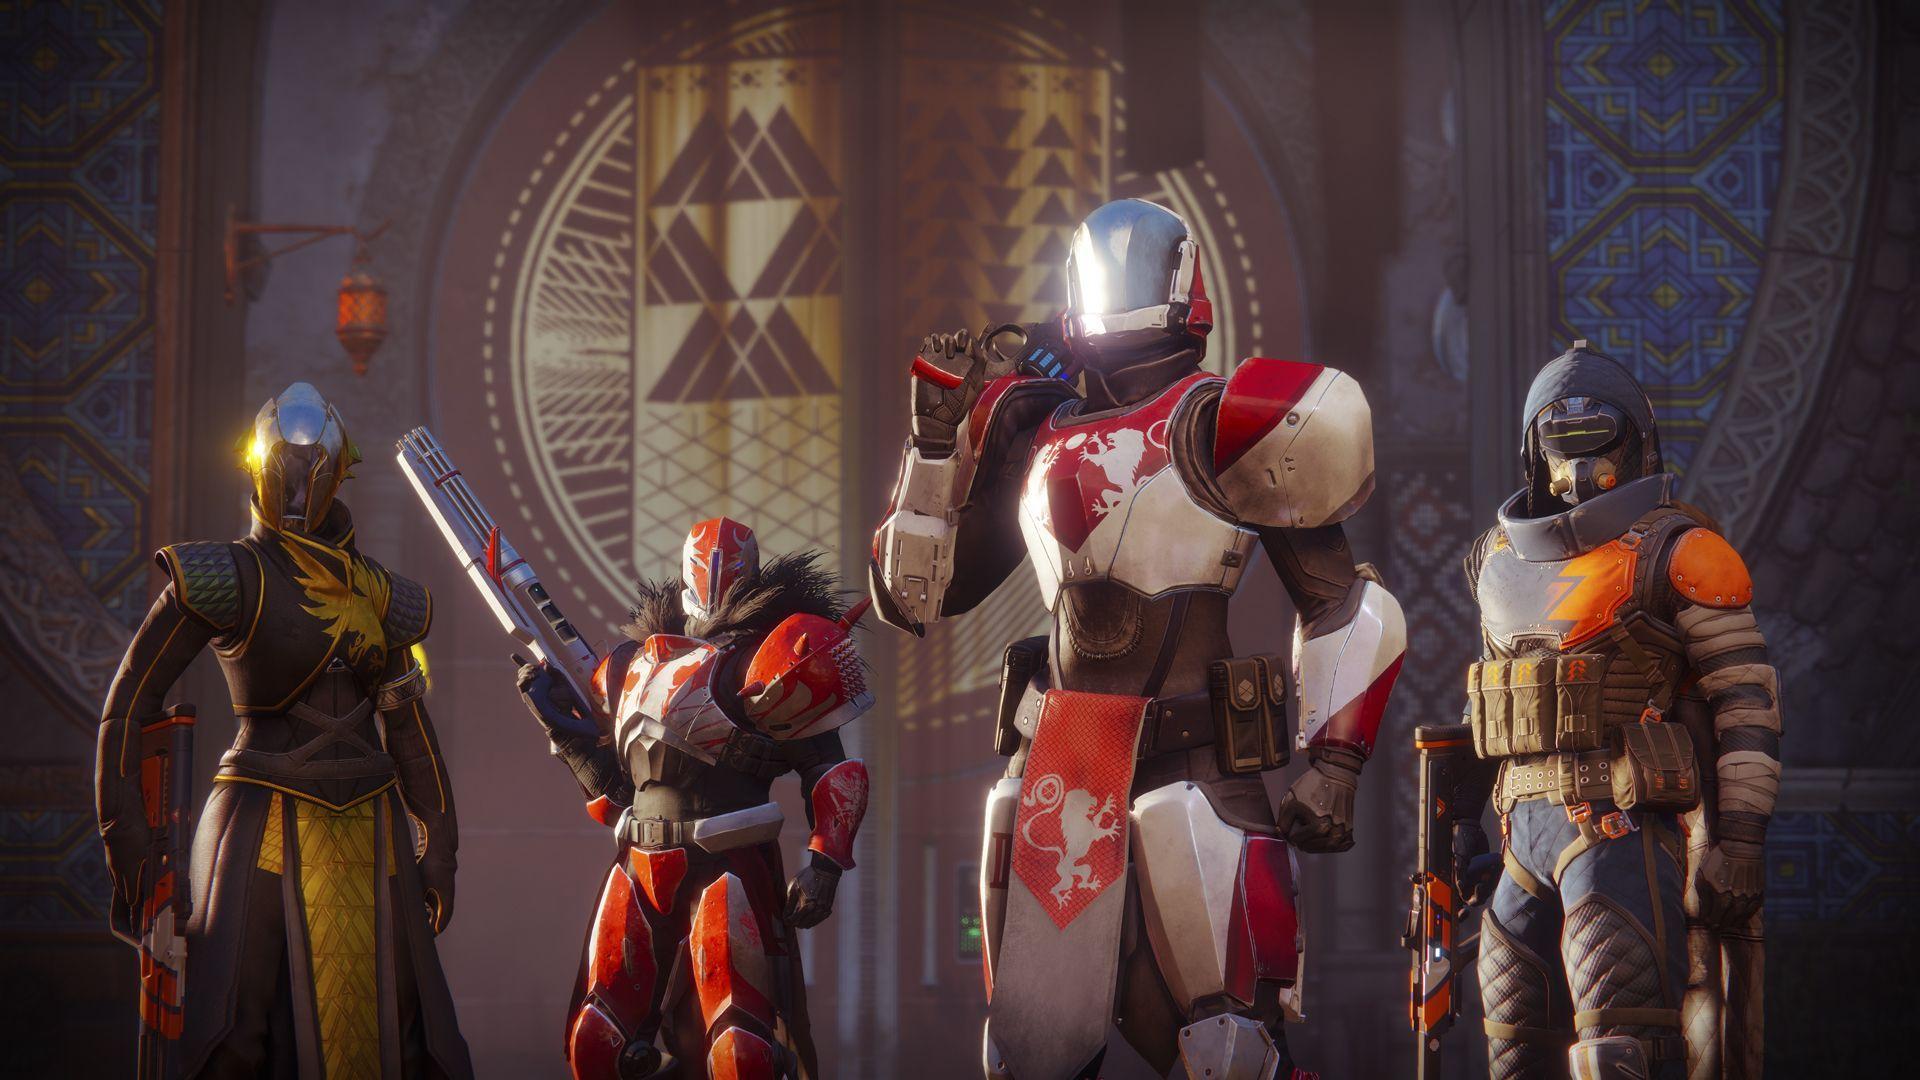 Destiny 2 feels familiar, which is both good and bad